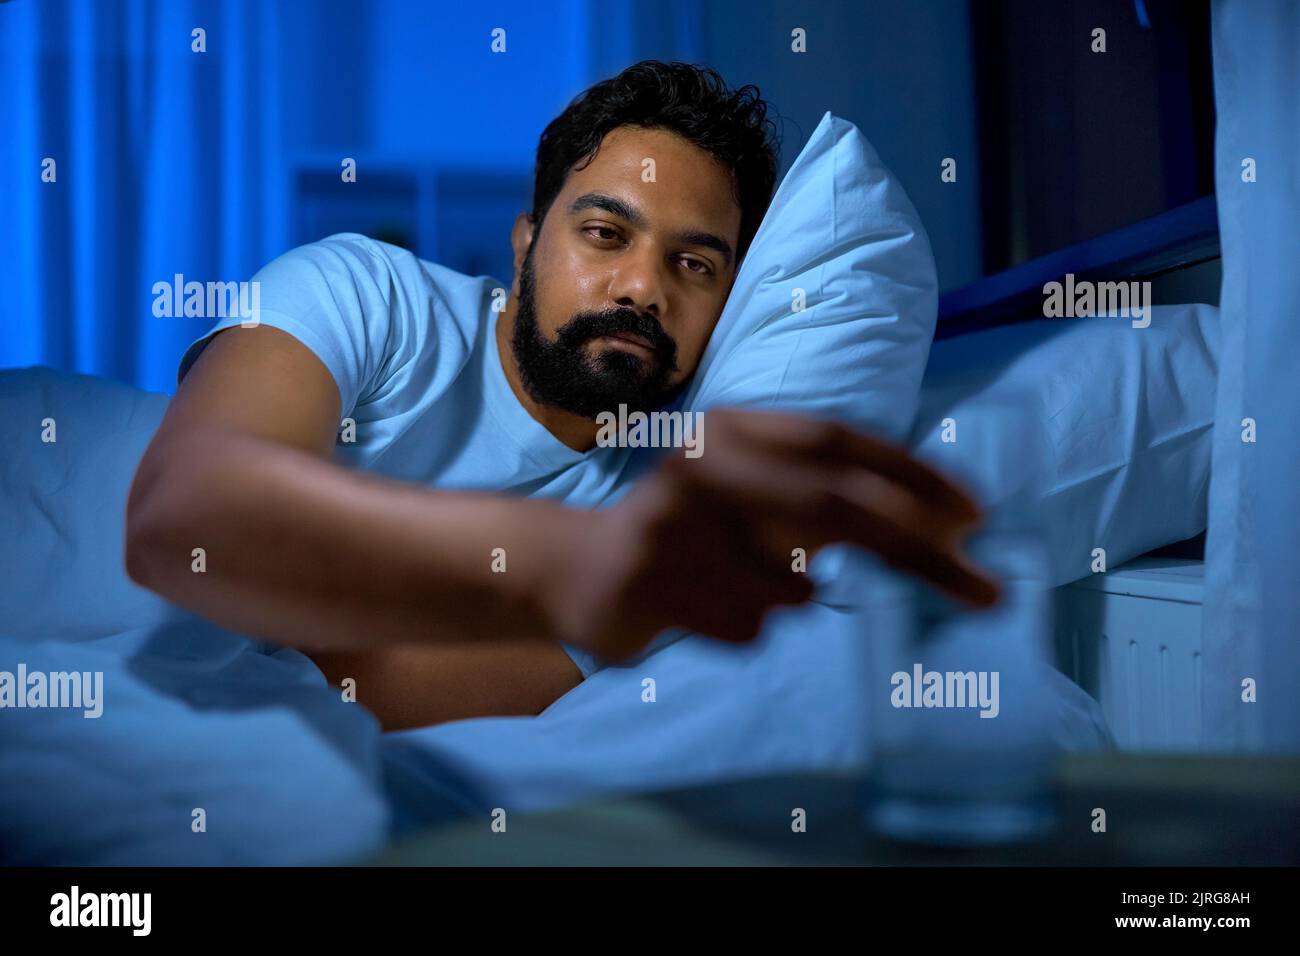 indian man drinking water in bed at night Stock Photo